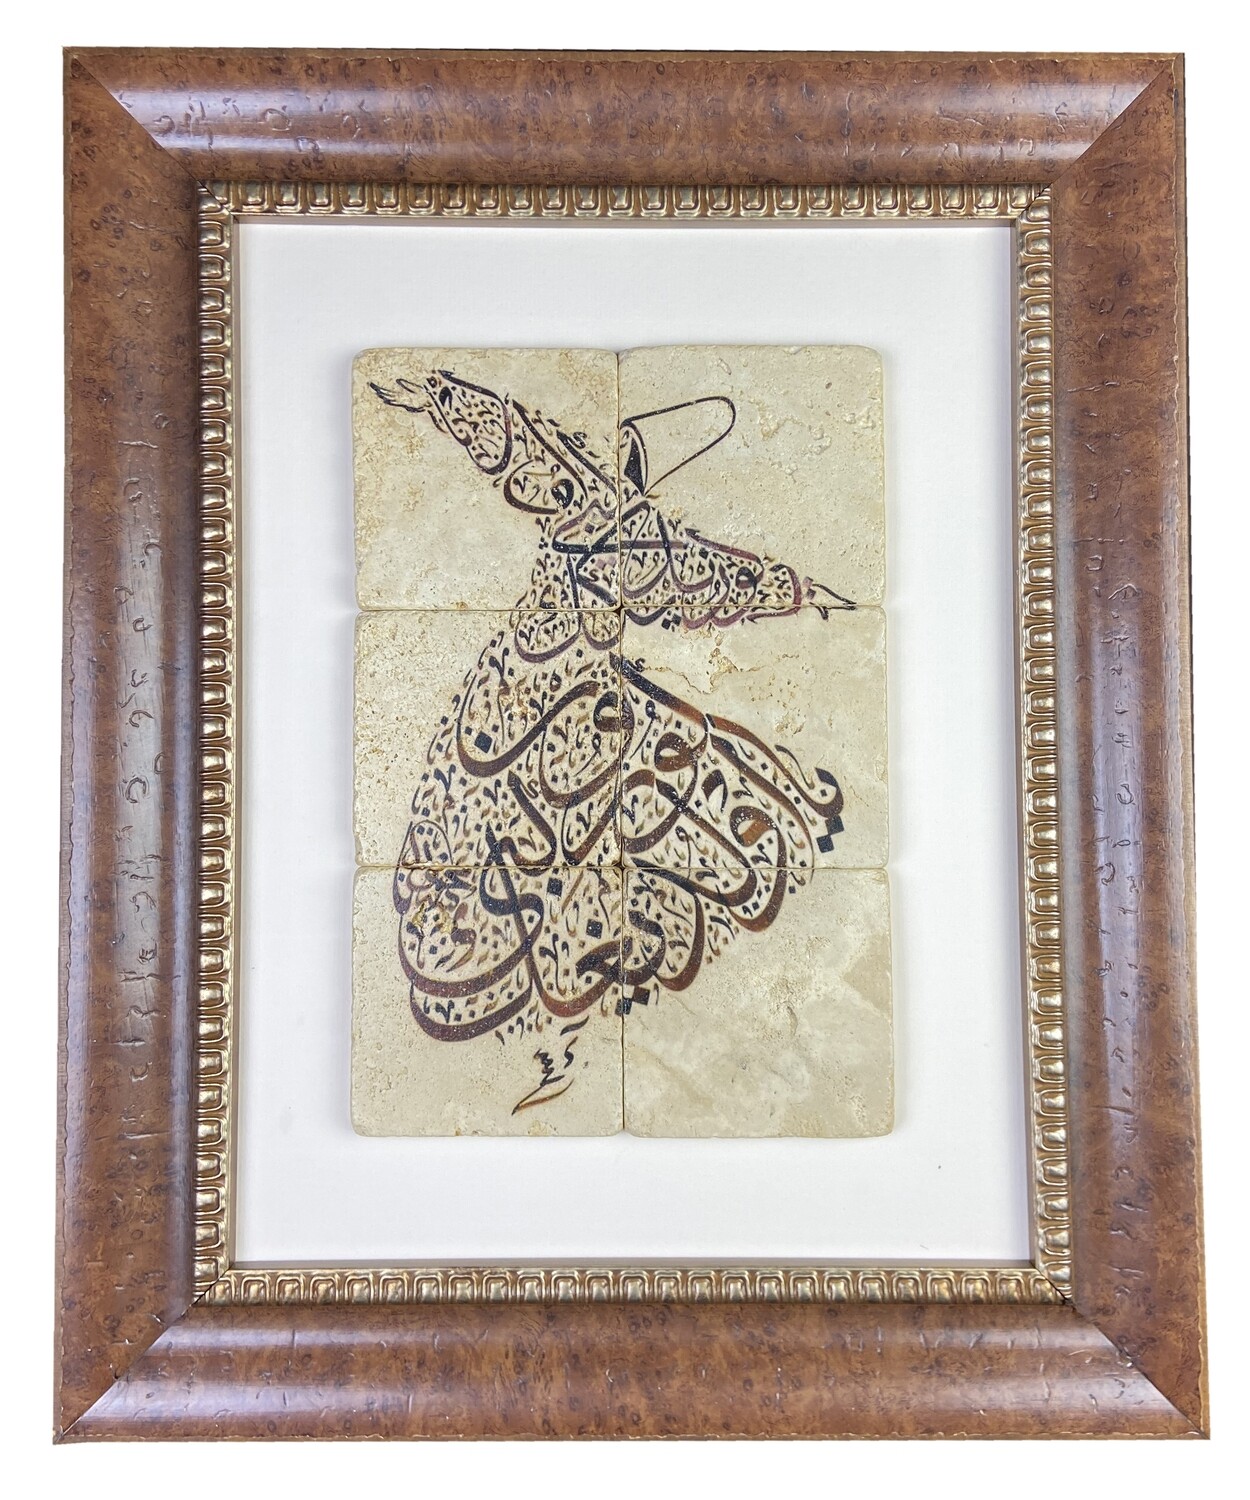 Rumi Poetry in Whirling Dervish Calligraphy Turkish Design Stone Art